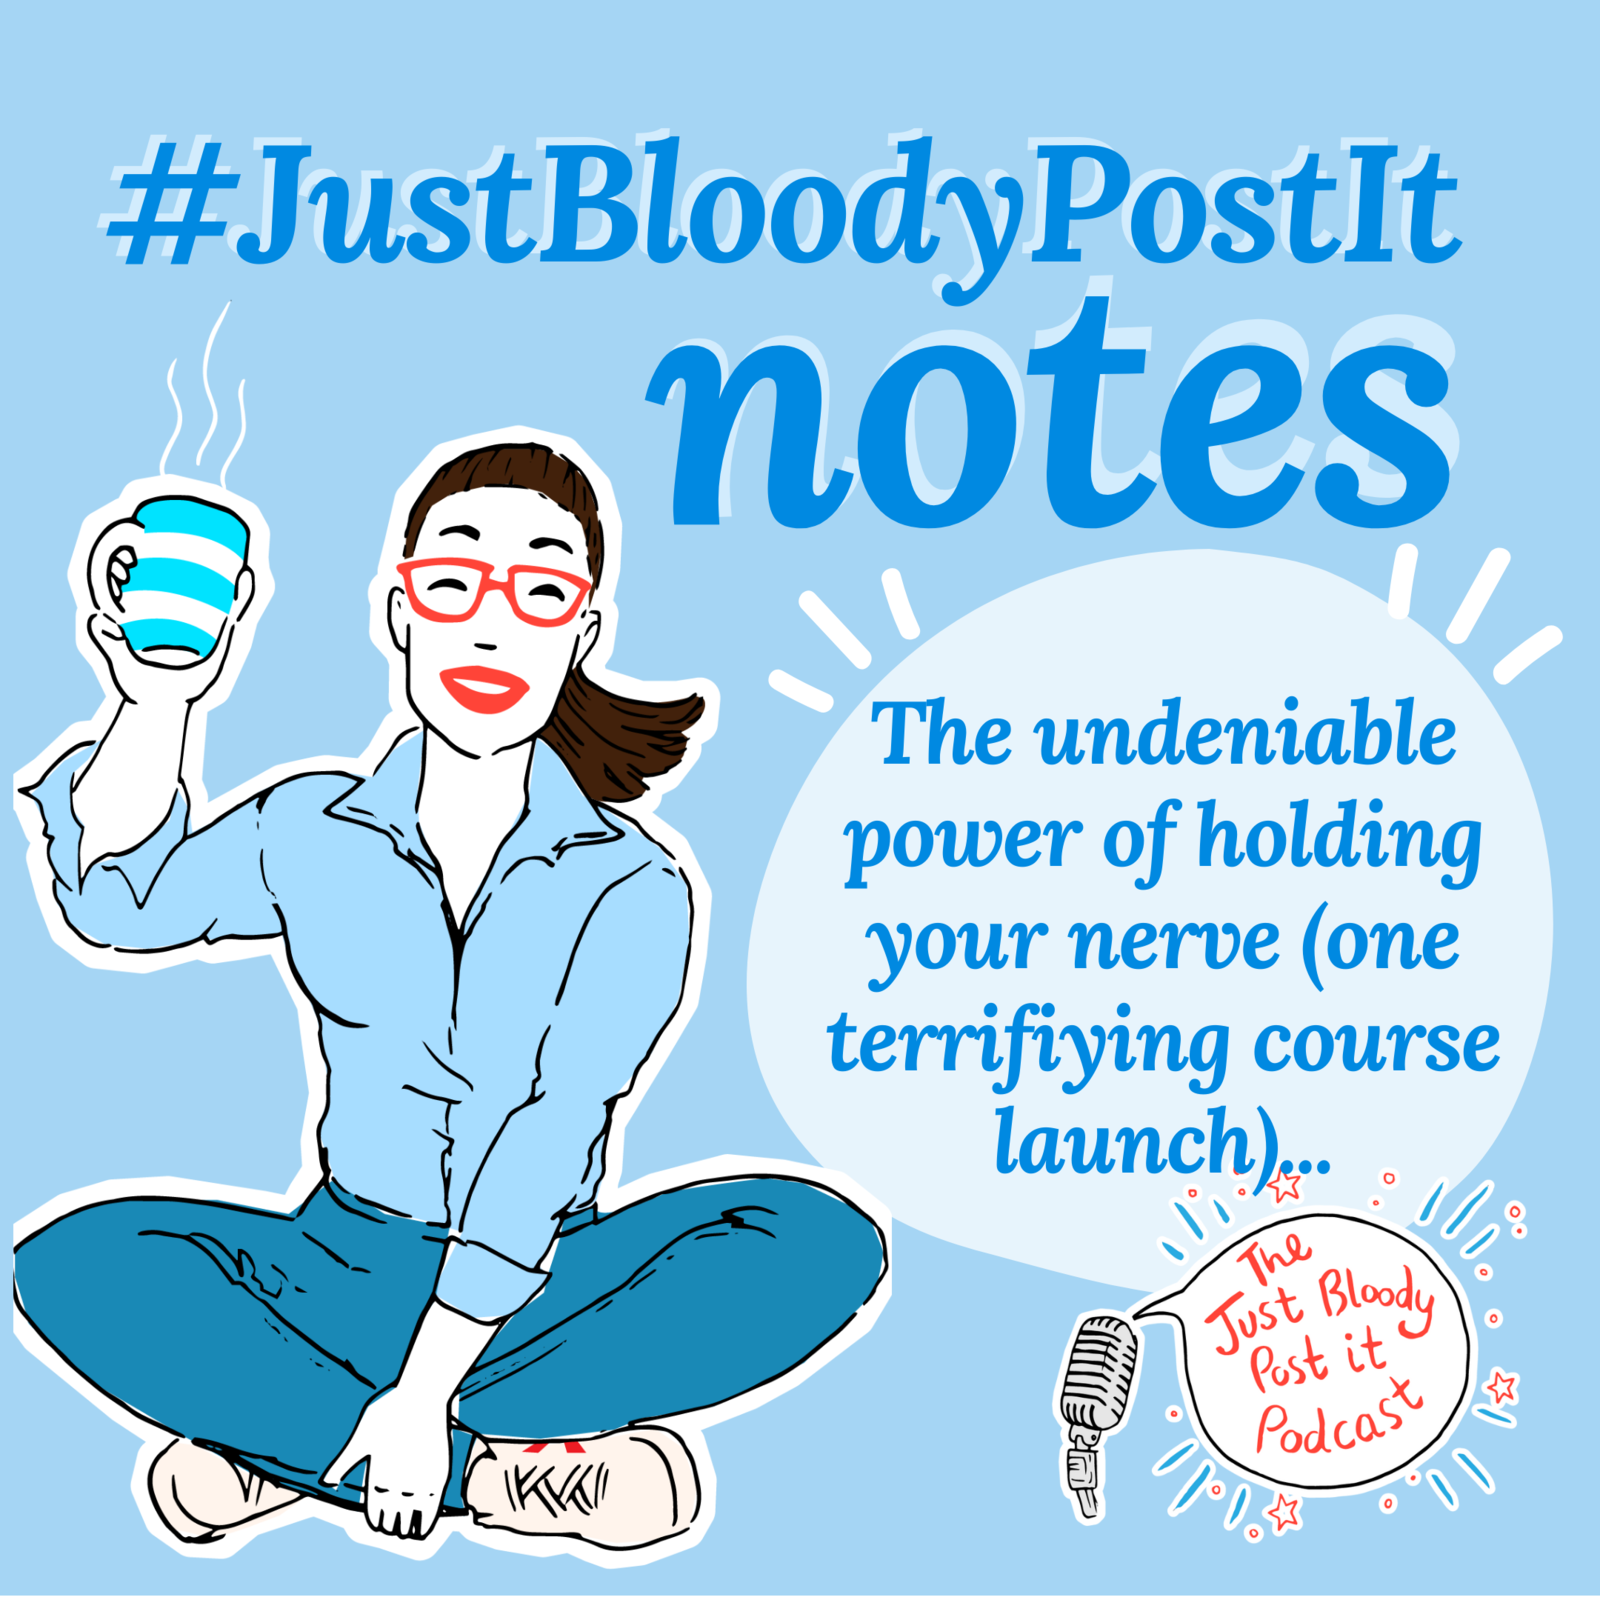 S2 Ep33: #JustBloodyPostIt Note on the undeniable power of holding your nerve